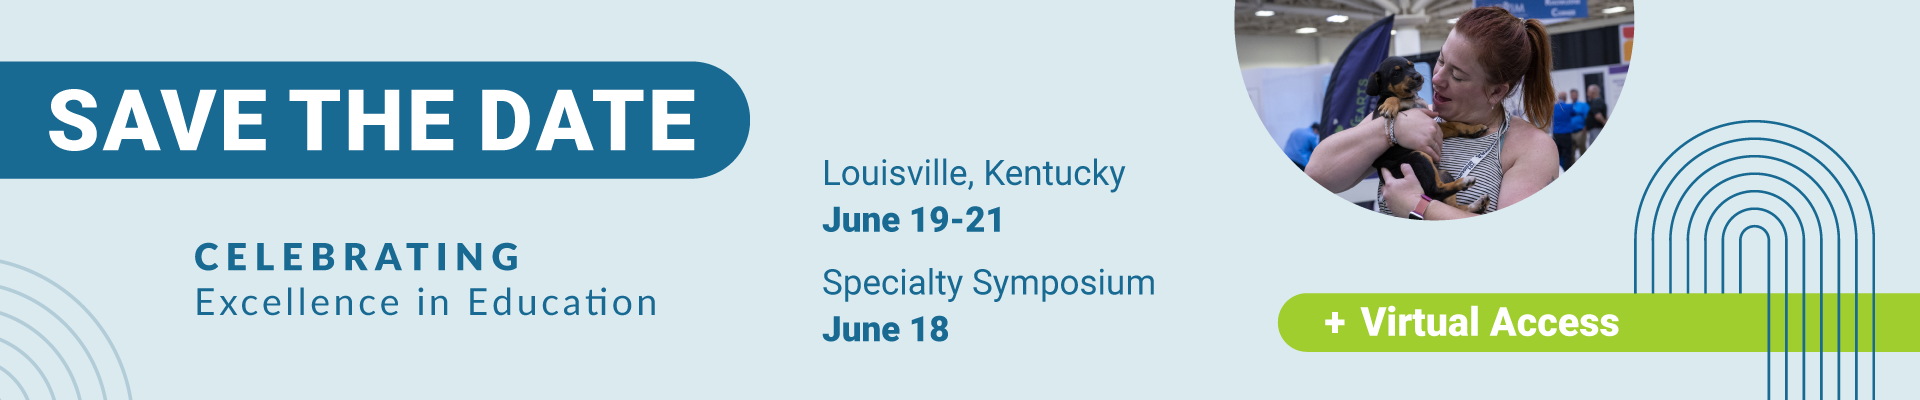 Save the Date: Louisville, Kentucky June 12-14, Specialty Symposium June 11, plus Virtual Access